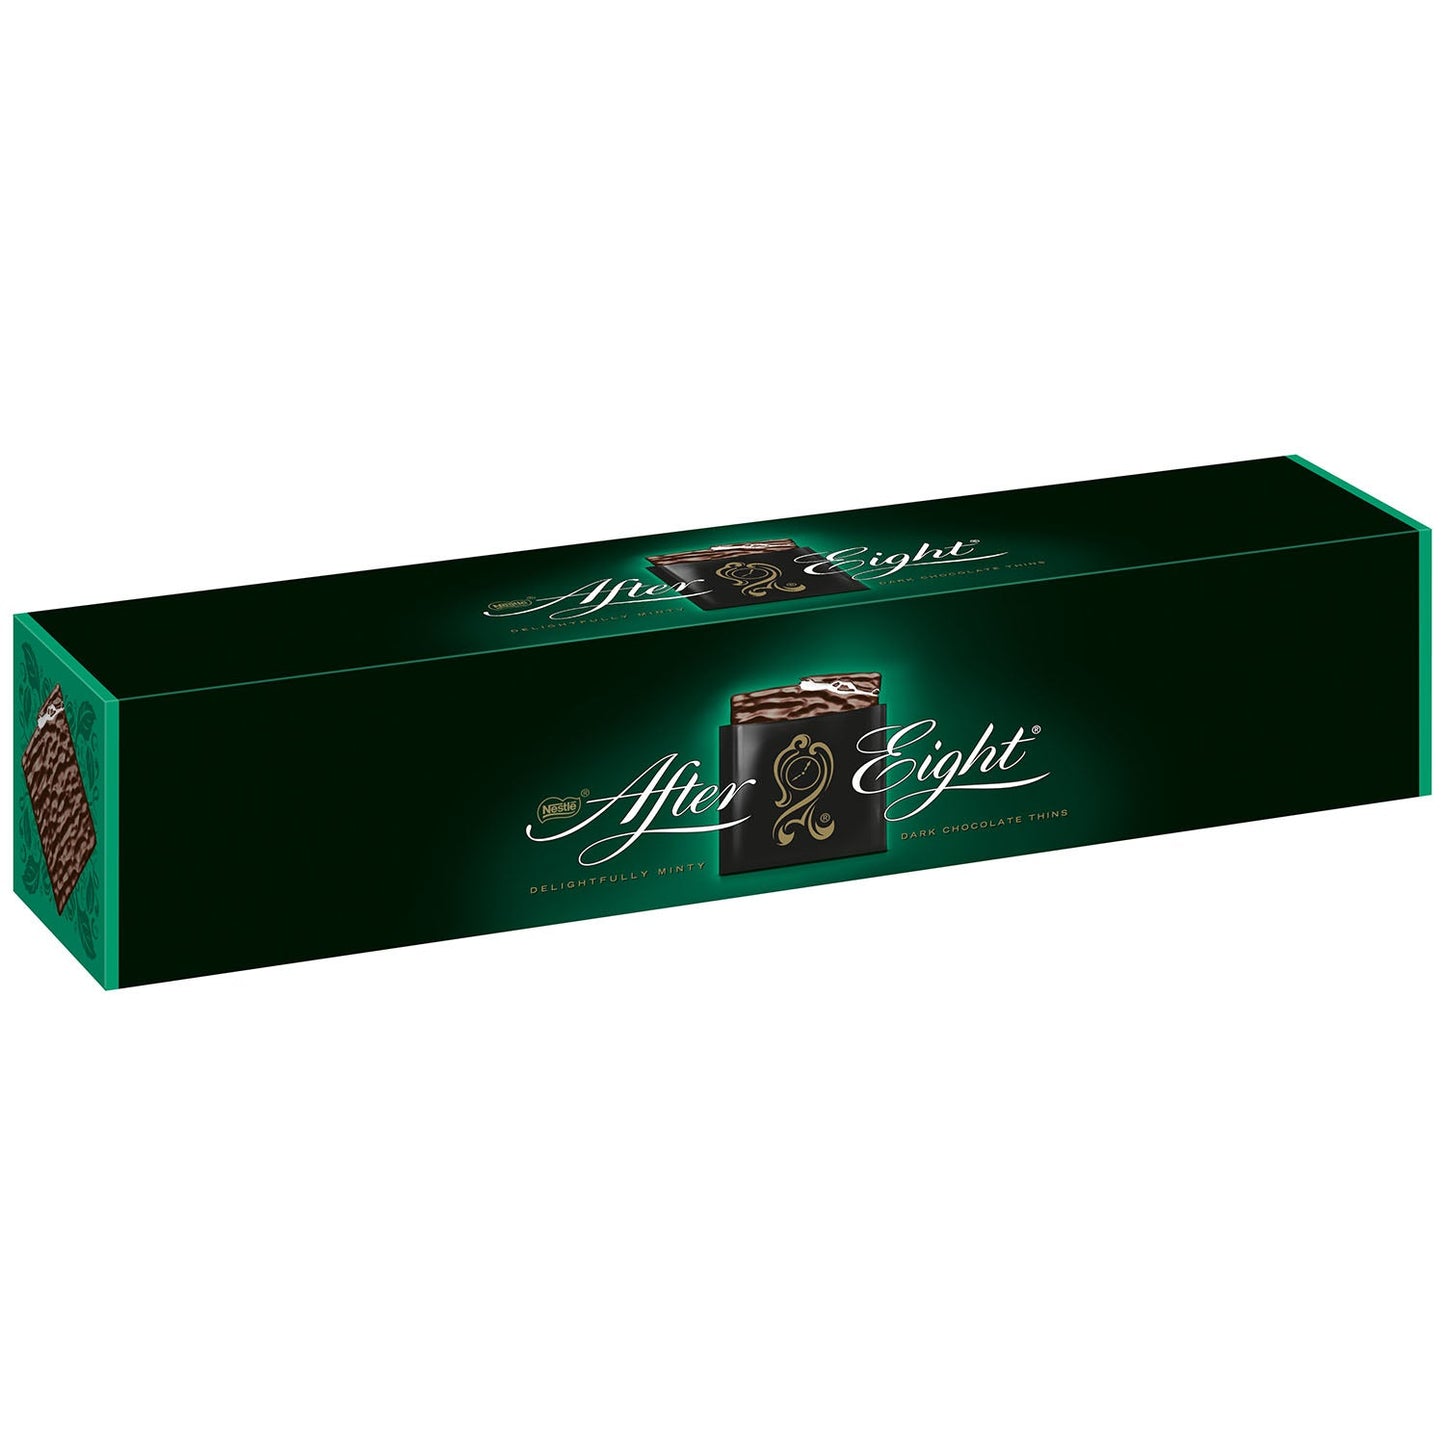 After Eight Classic 400g - Candyshop.ch